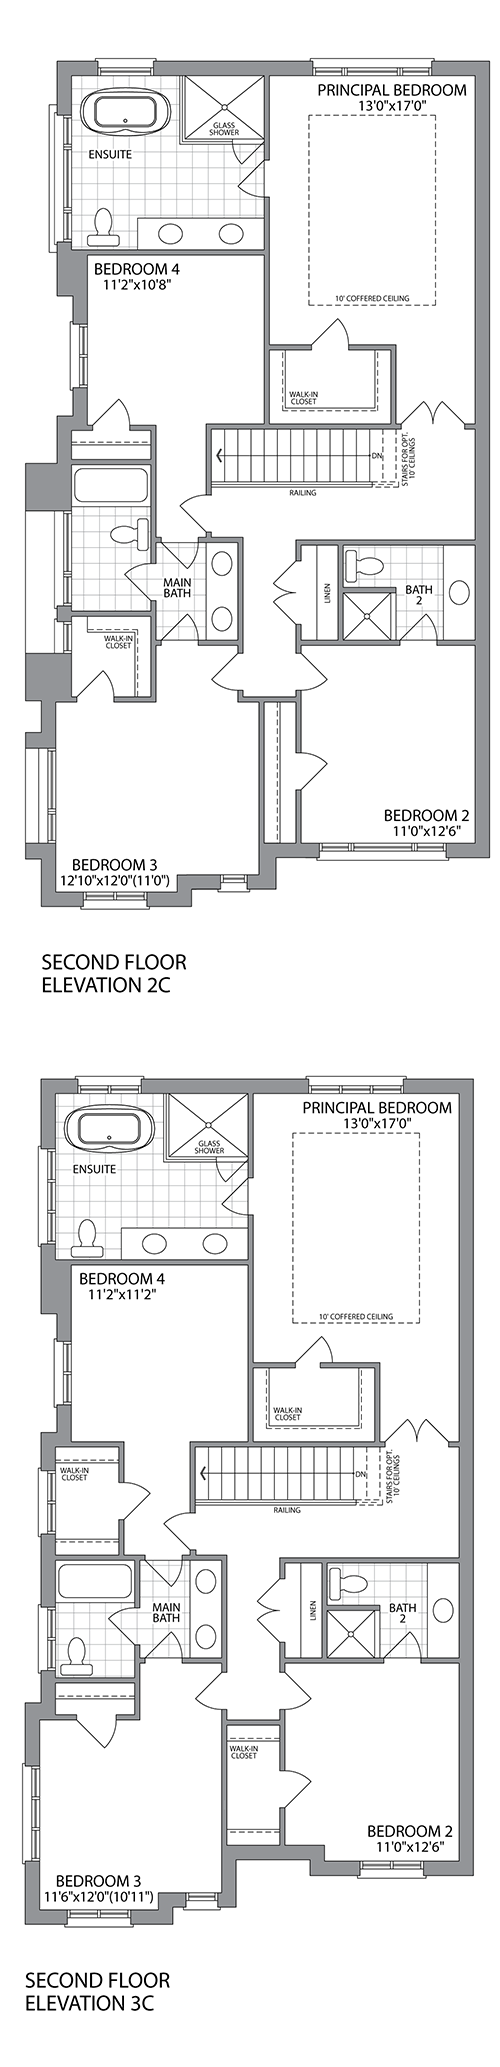 The HILLCREST (LOT N1) Second Floor